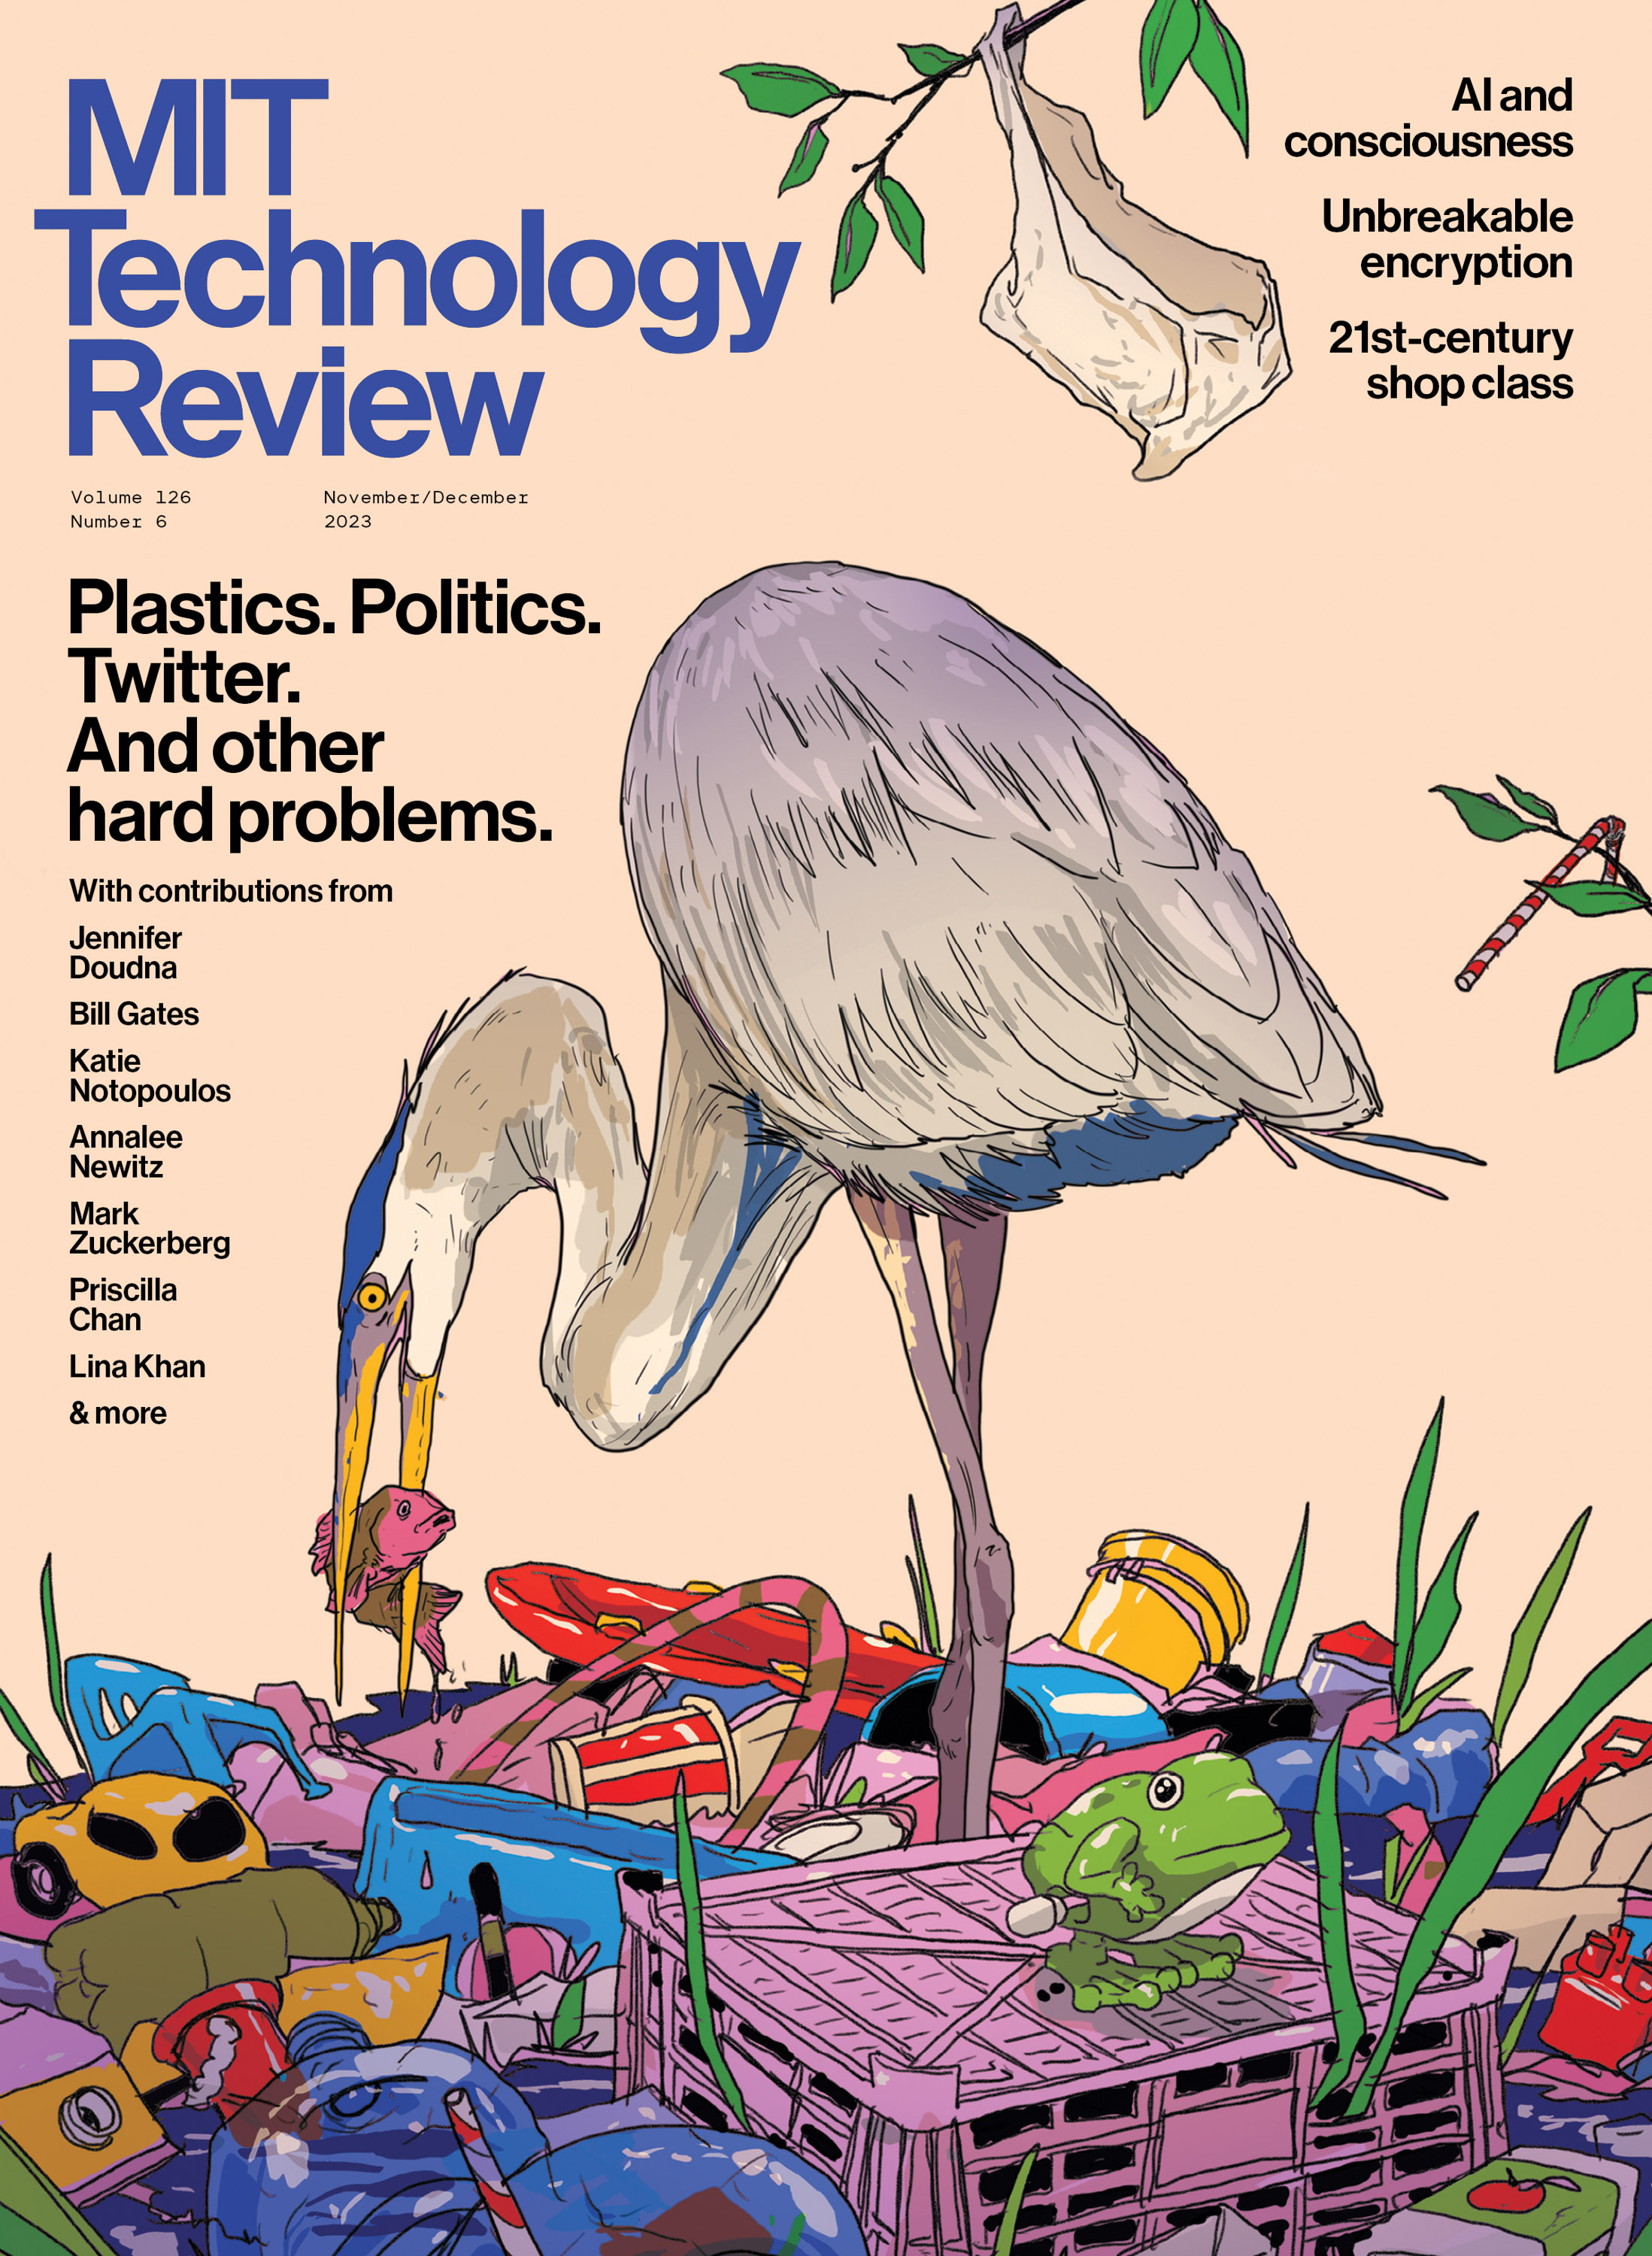 ND23 cover image: a heron plucks a pink plastic fish from a landscape contaminated with plastic trash